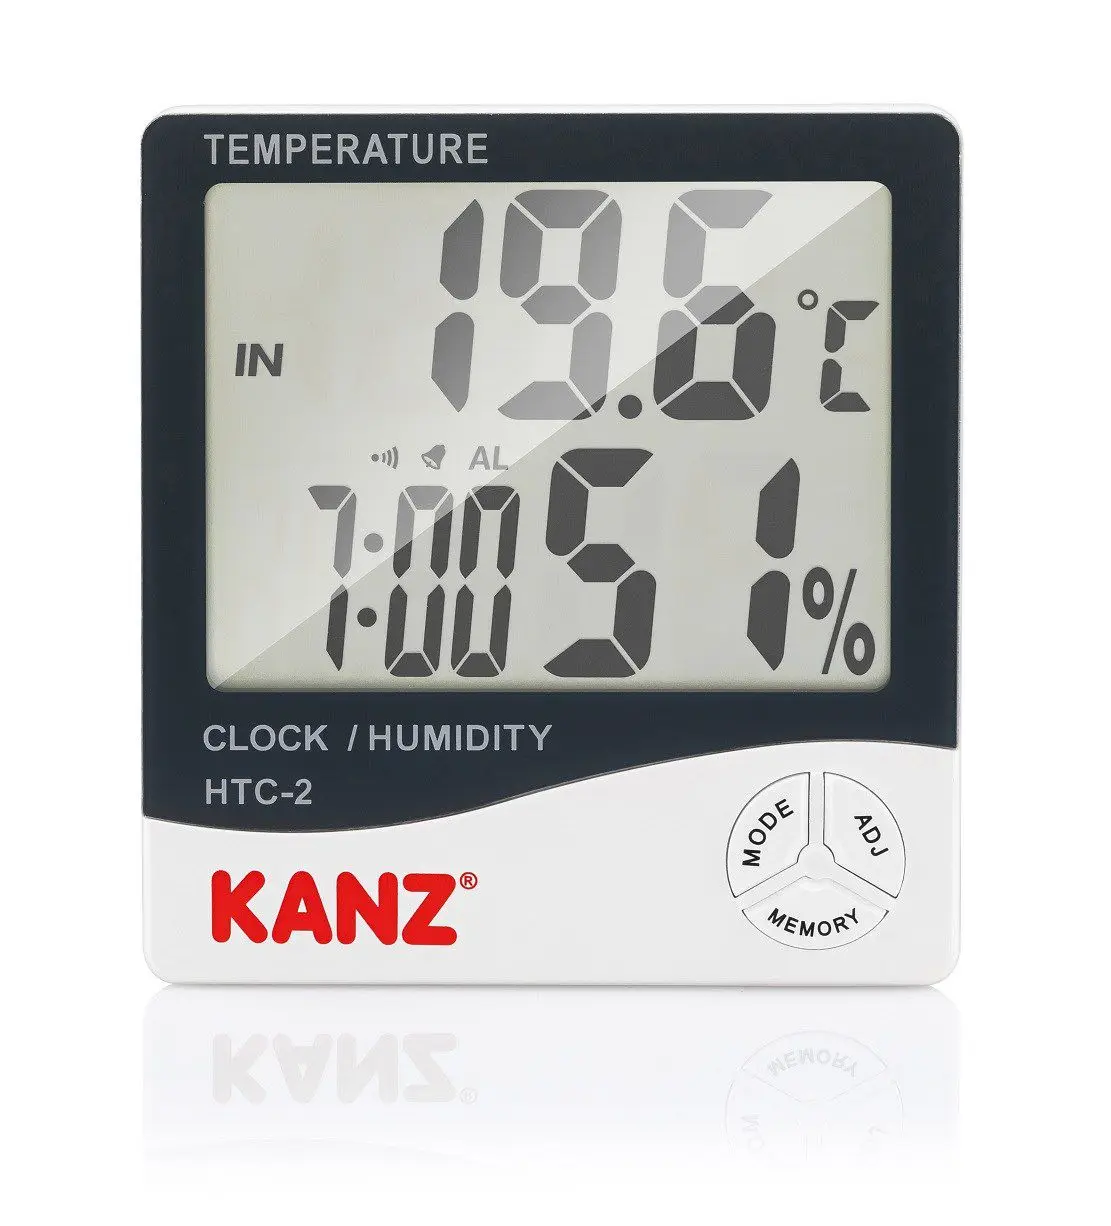 Kanz Htc-2 Digital effect: Humidity Meter - thermometer